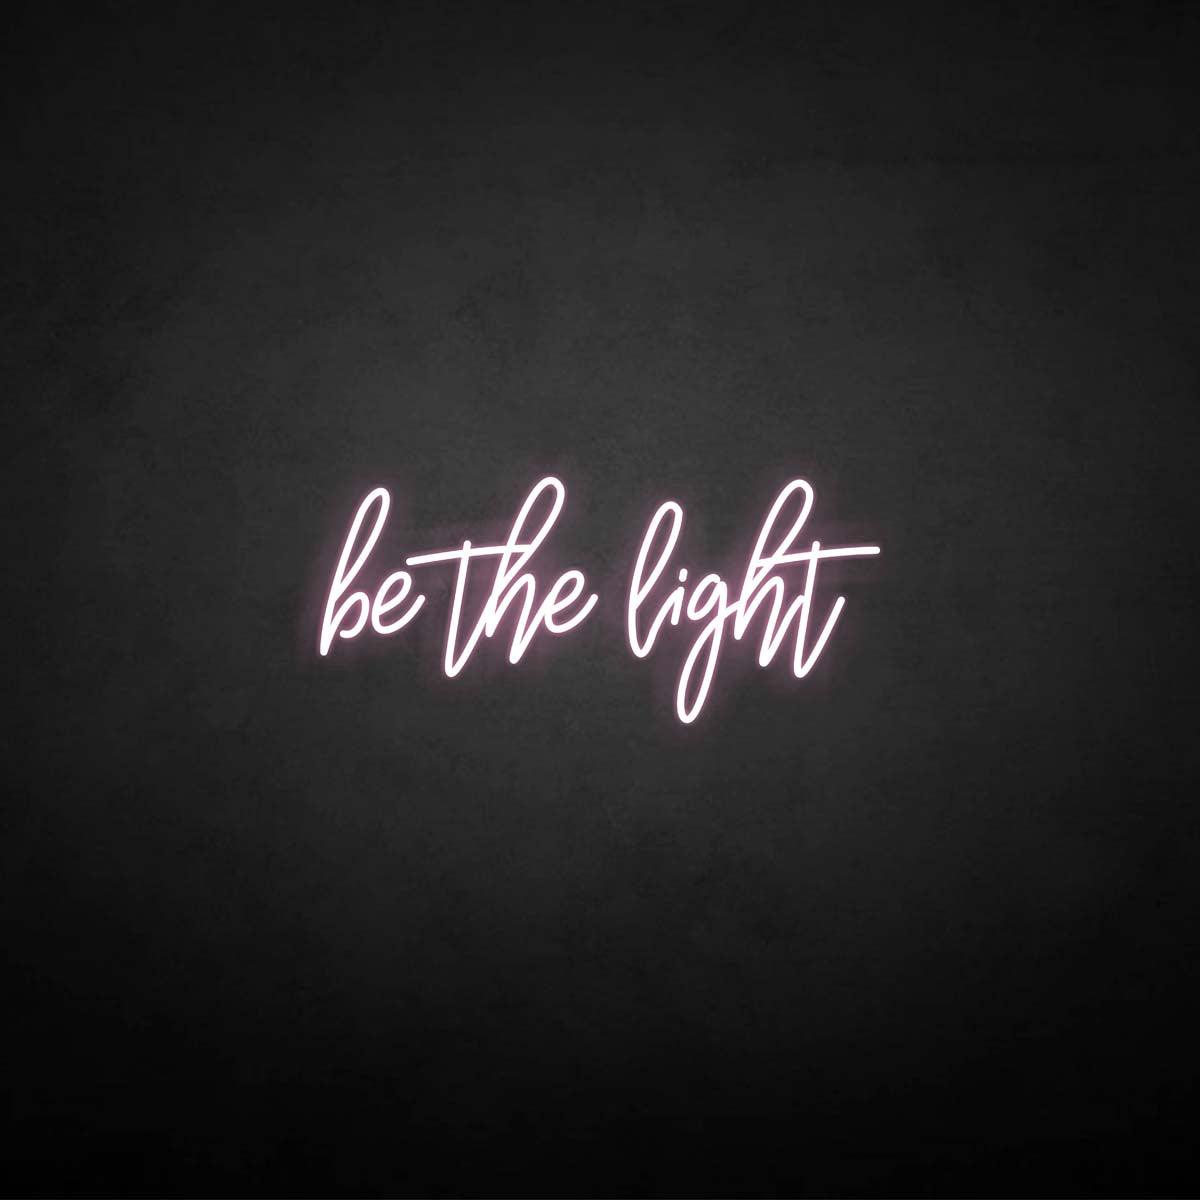 'Be the light' neon sign